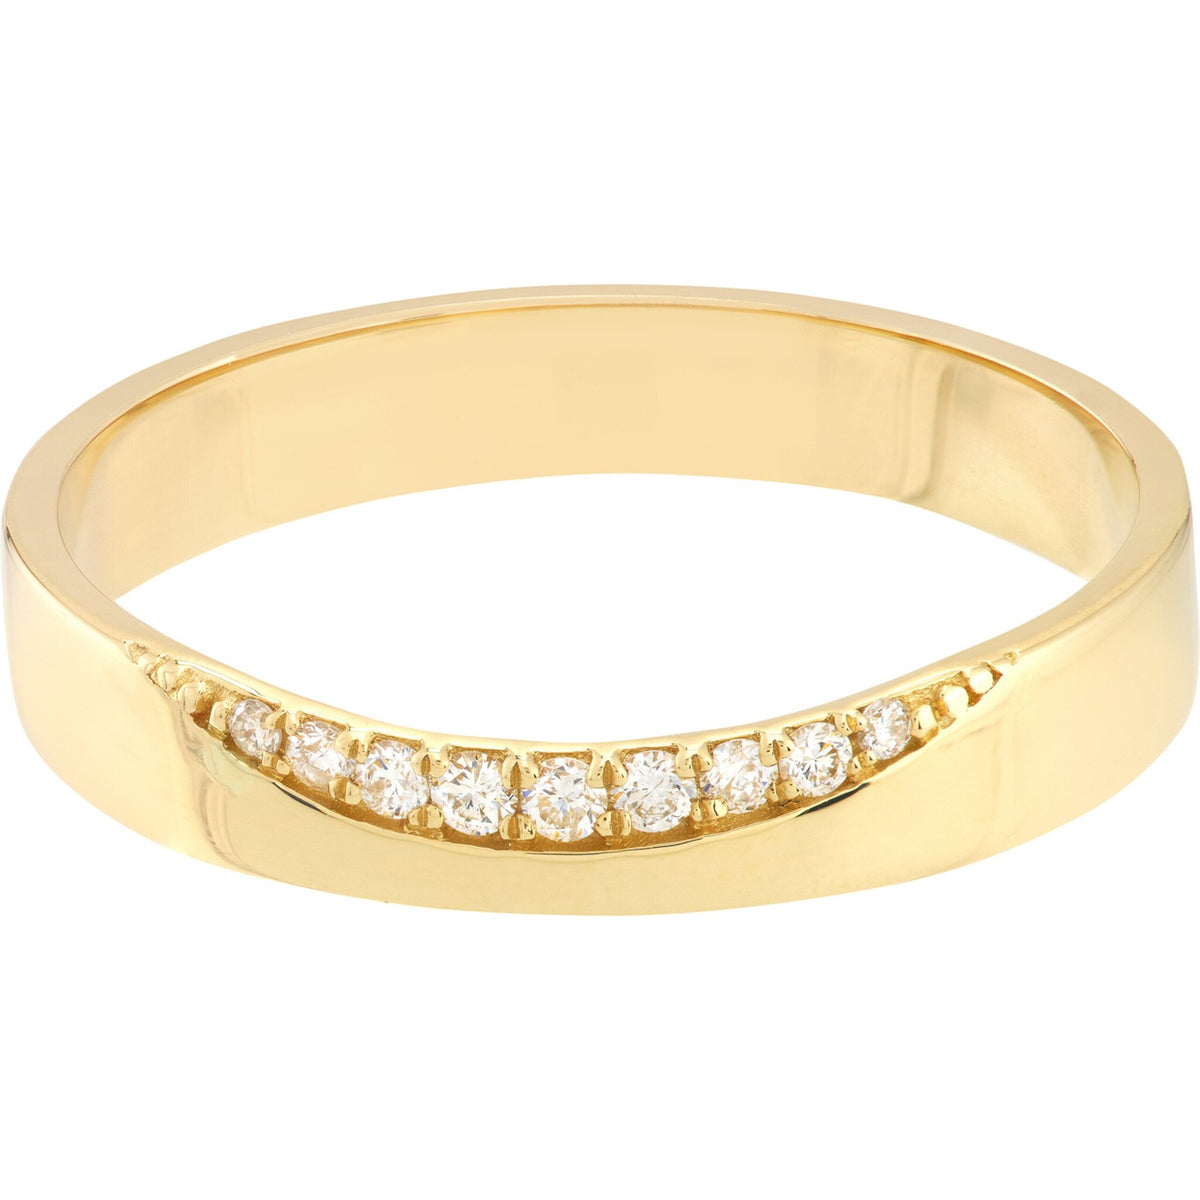 Olas d'Oro 6" Ring - 14K Yellow Gold Diamond Curved Side Polished Band